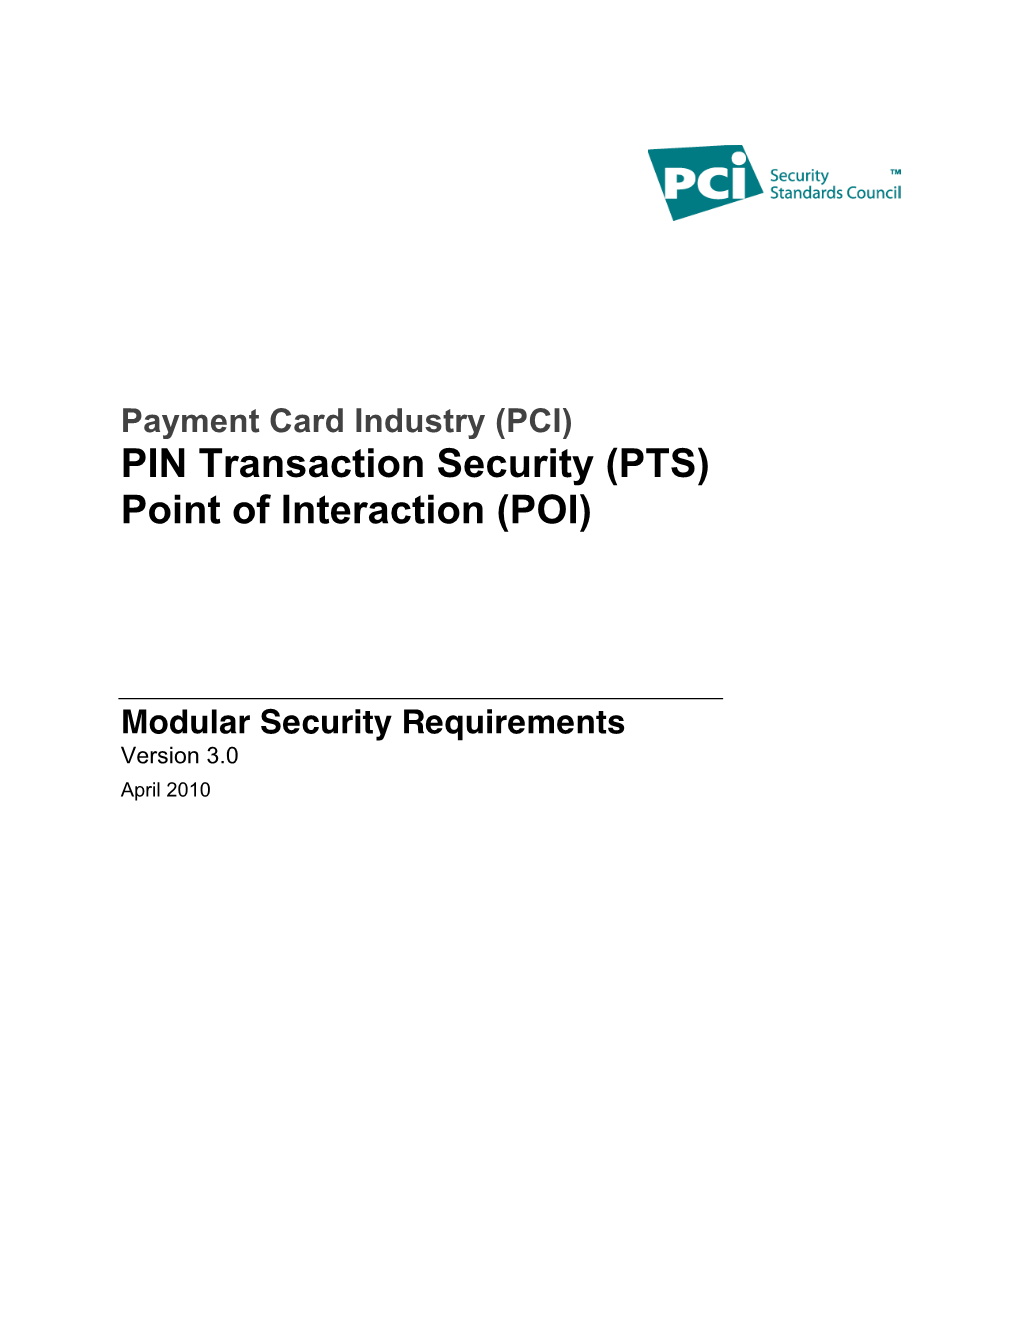 PCI) PIN Transaction Security (PTS) Point of Interaction (POI